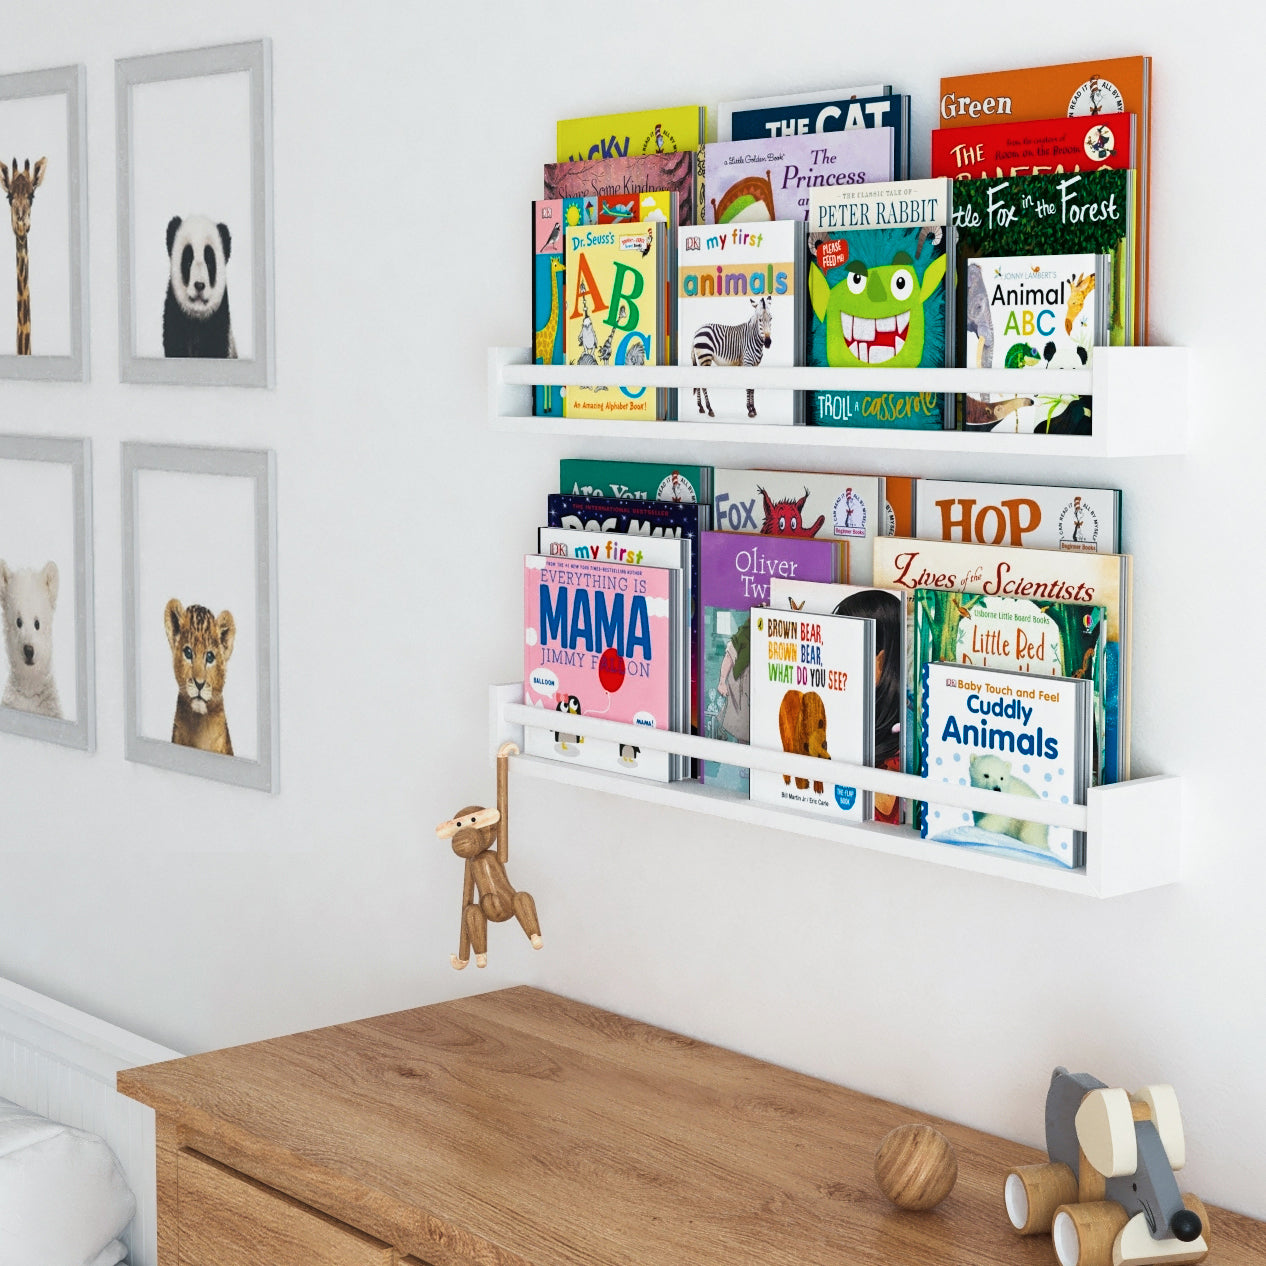 A nursery with two white wooden shelves for kids filled with colorful books above a wooden dresser, decorated with animal-themed wall art and a hanging monkey toy.